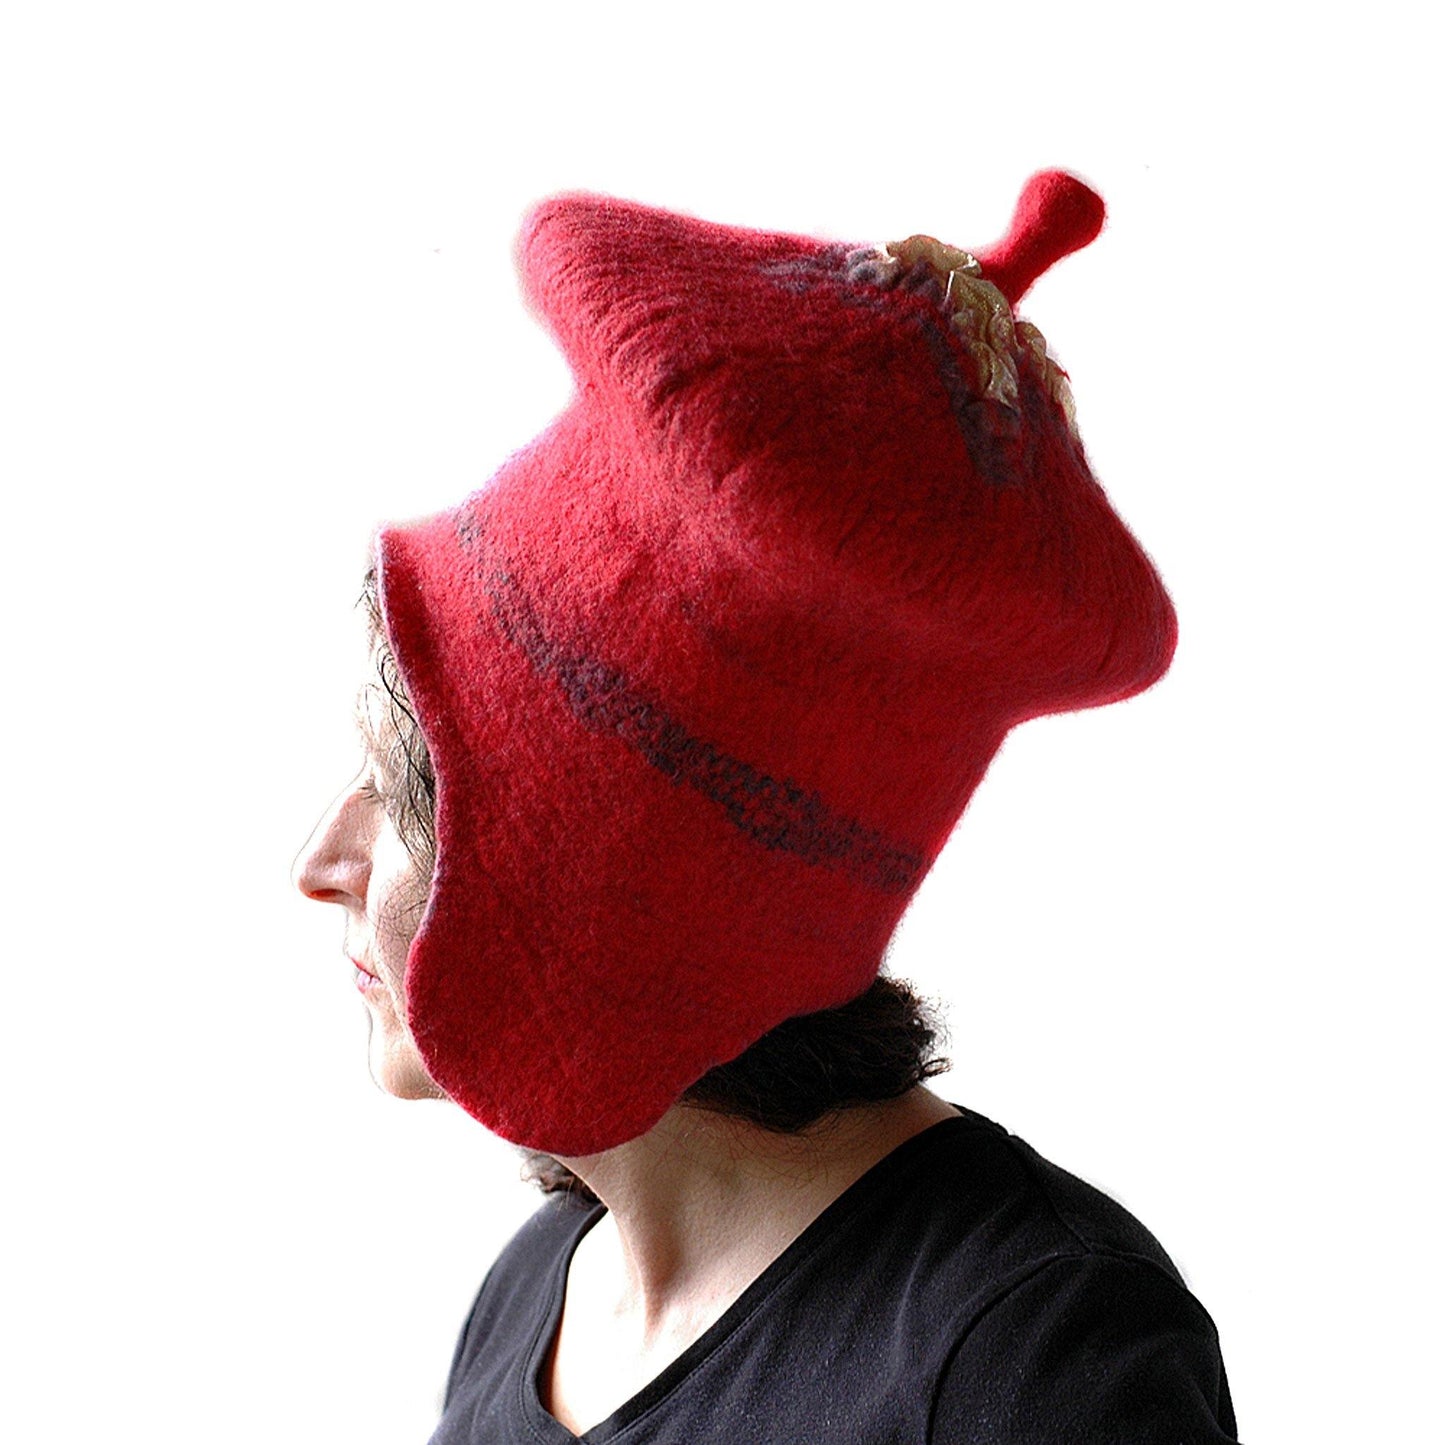 Watermelon Red Sci Fi Mushroom Wizard Hat with Earflaps - side view 1